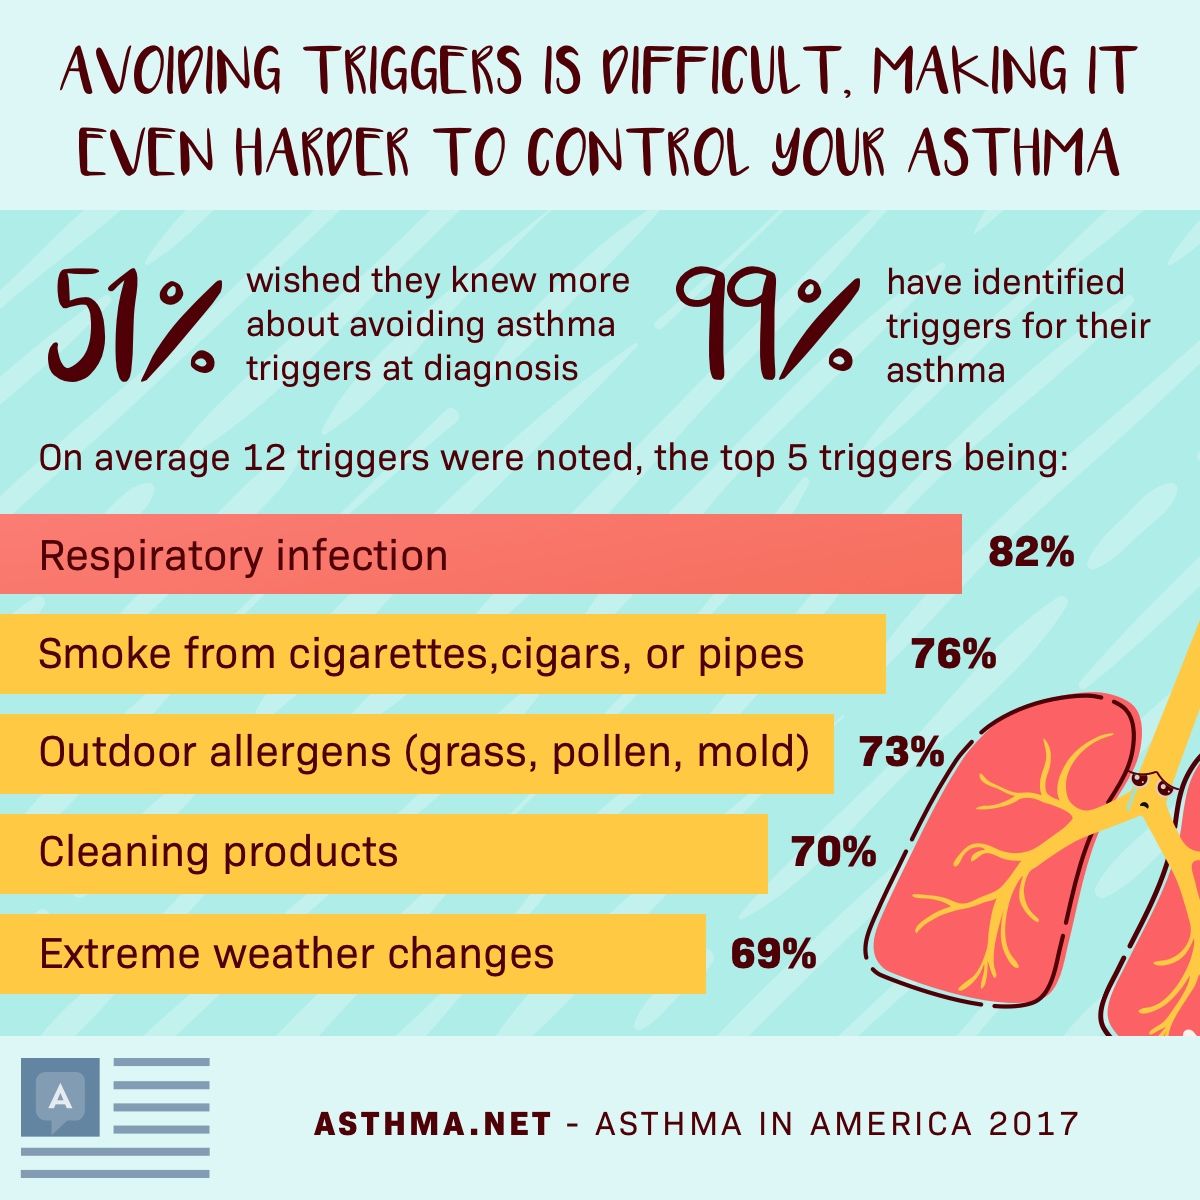 Asthma triggers make it harder to control asthma